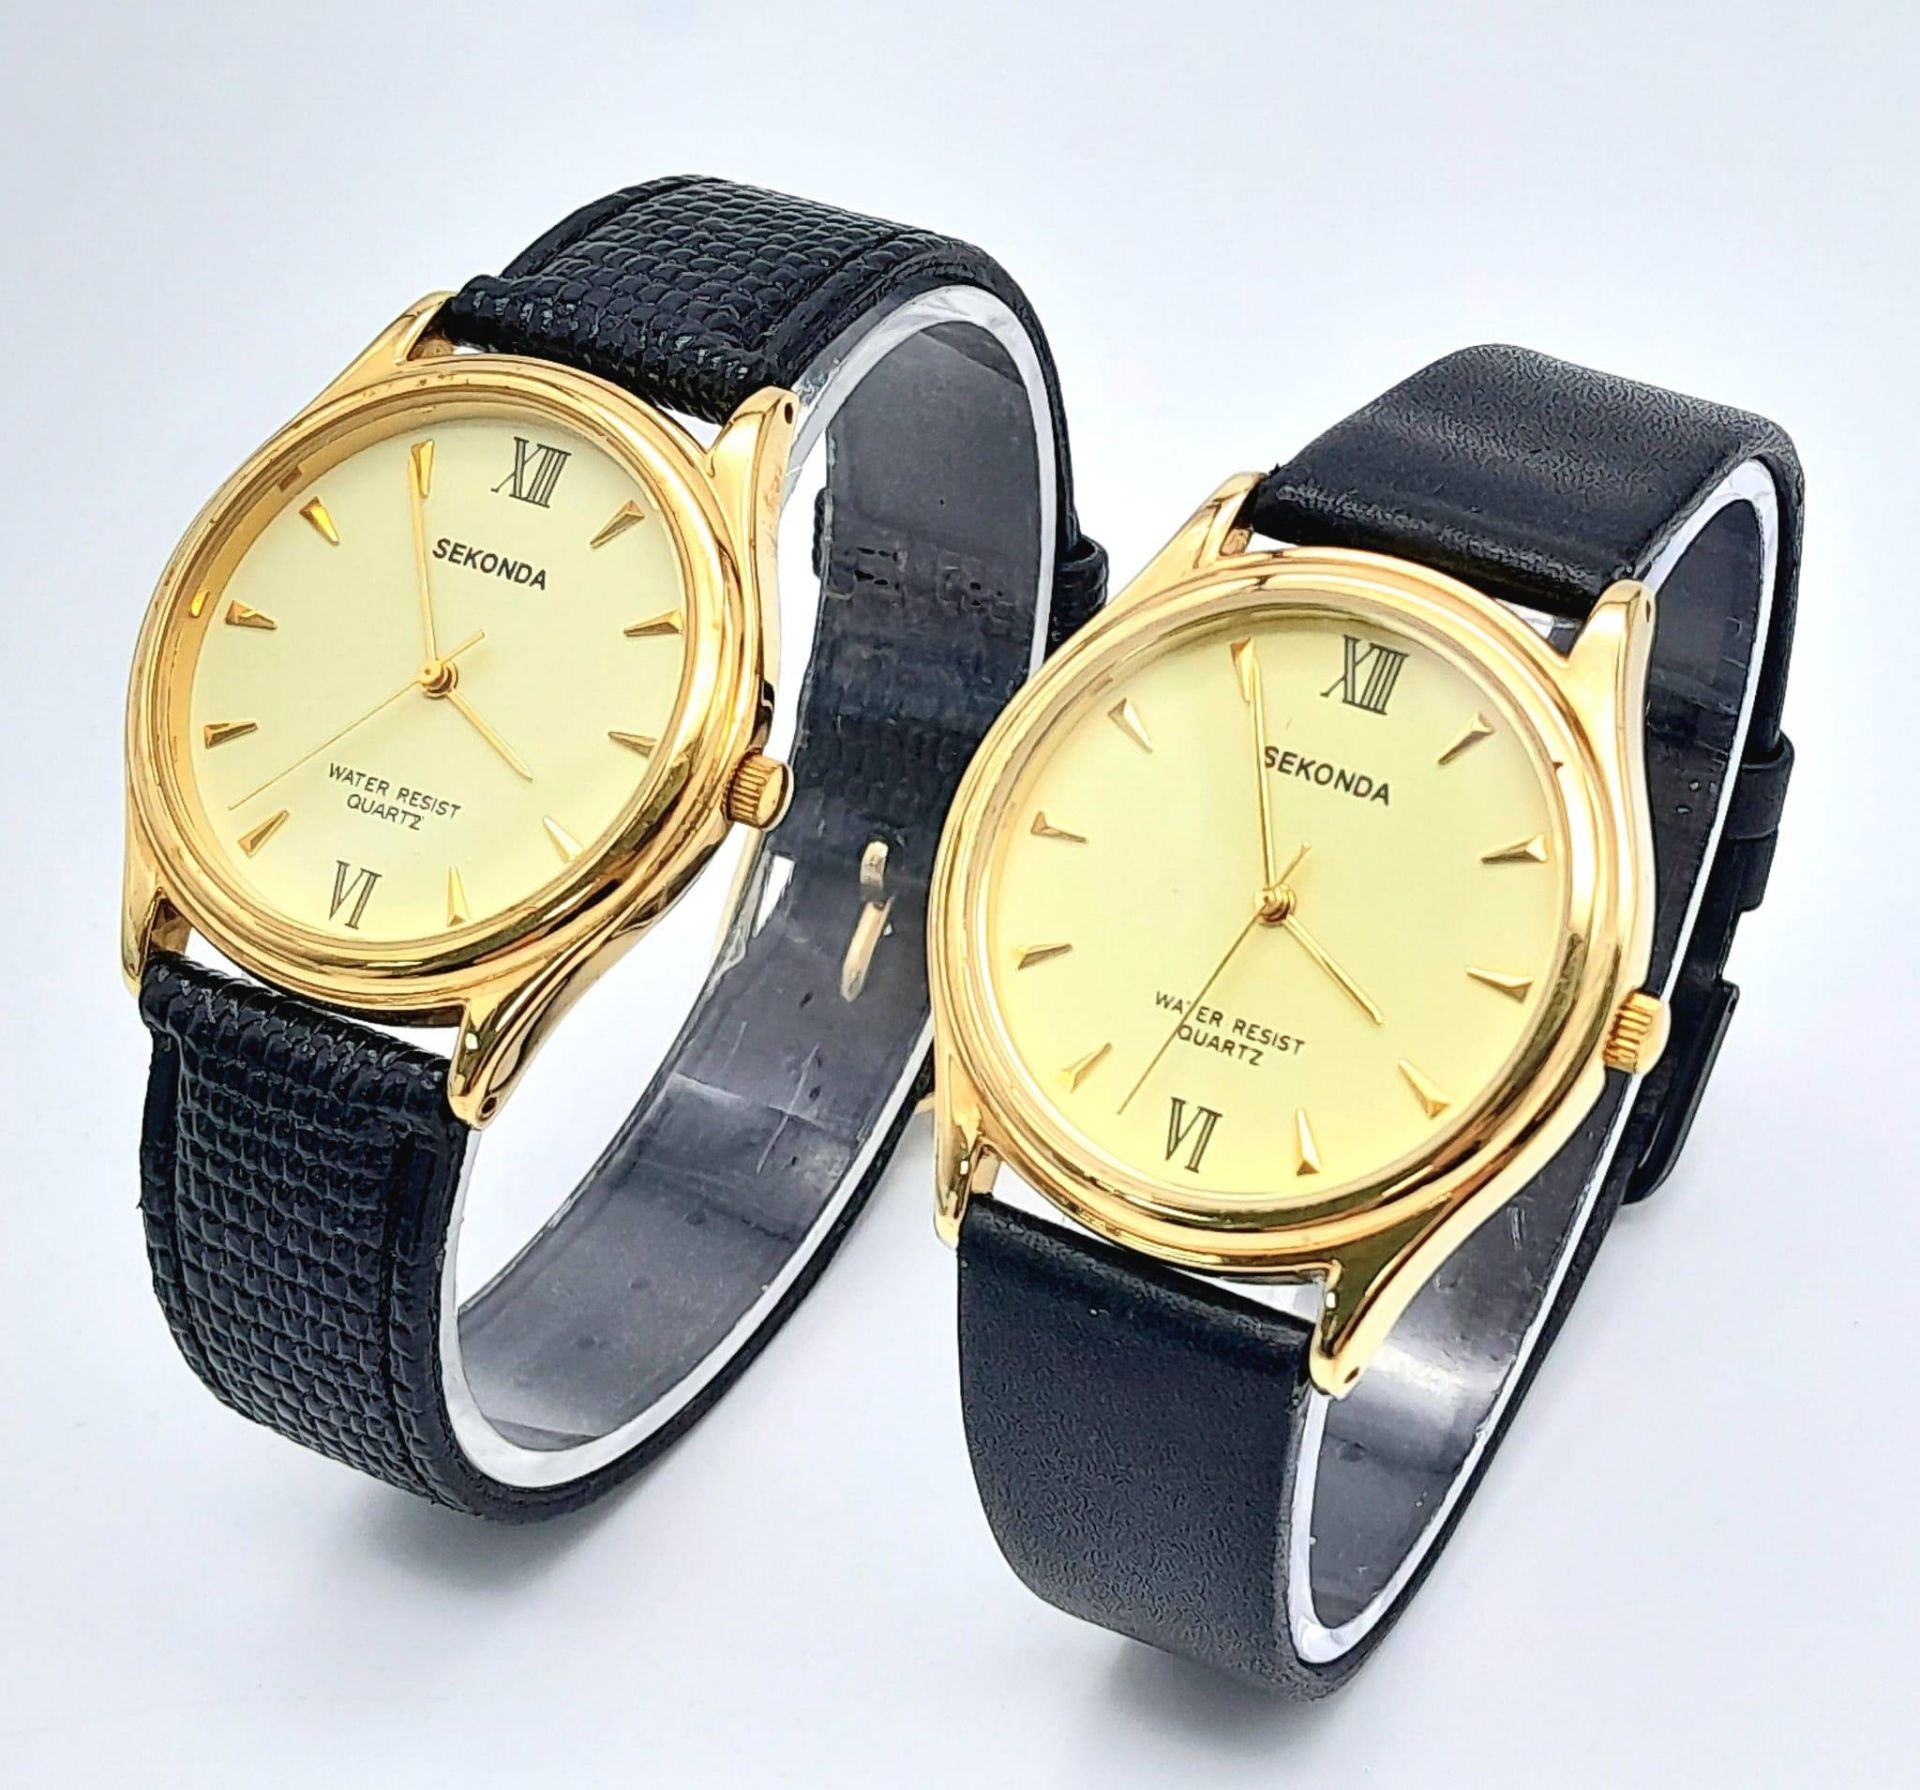 Two Sekonda Quartz Gents Watches. Black leather straps. Gilded stainless steel cases - 34mm. Both in